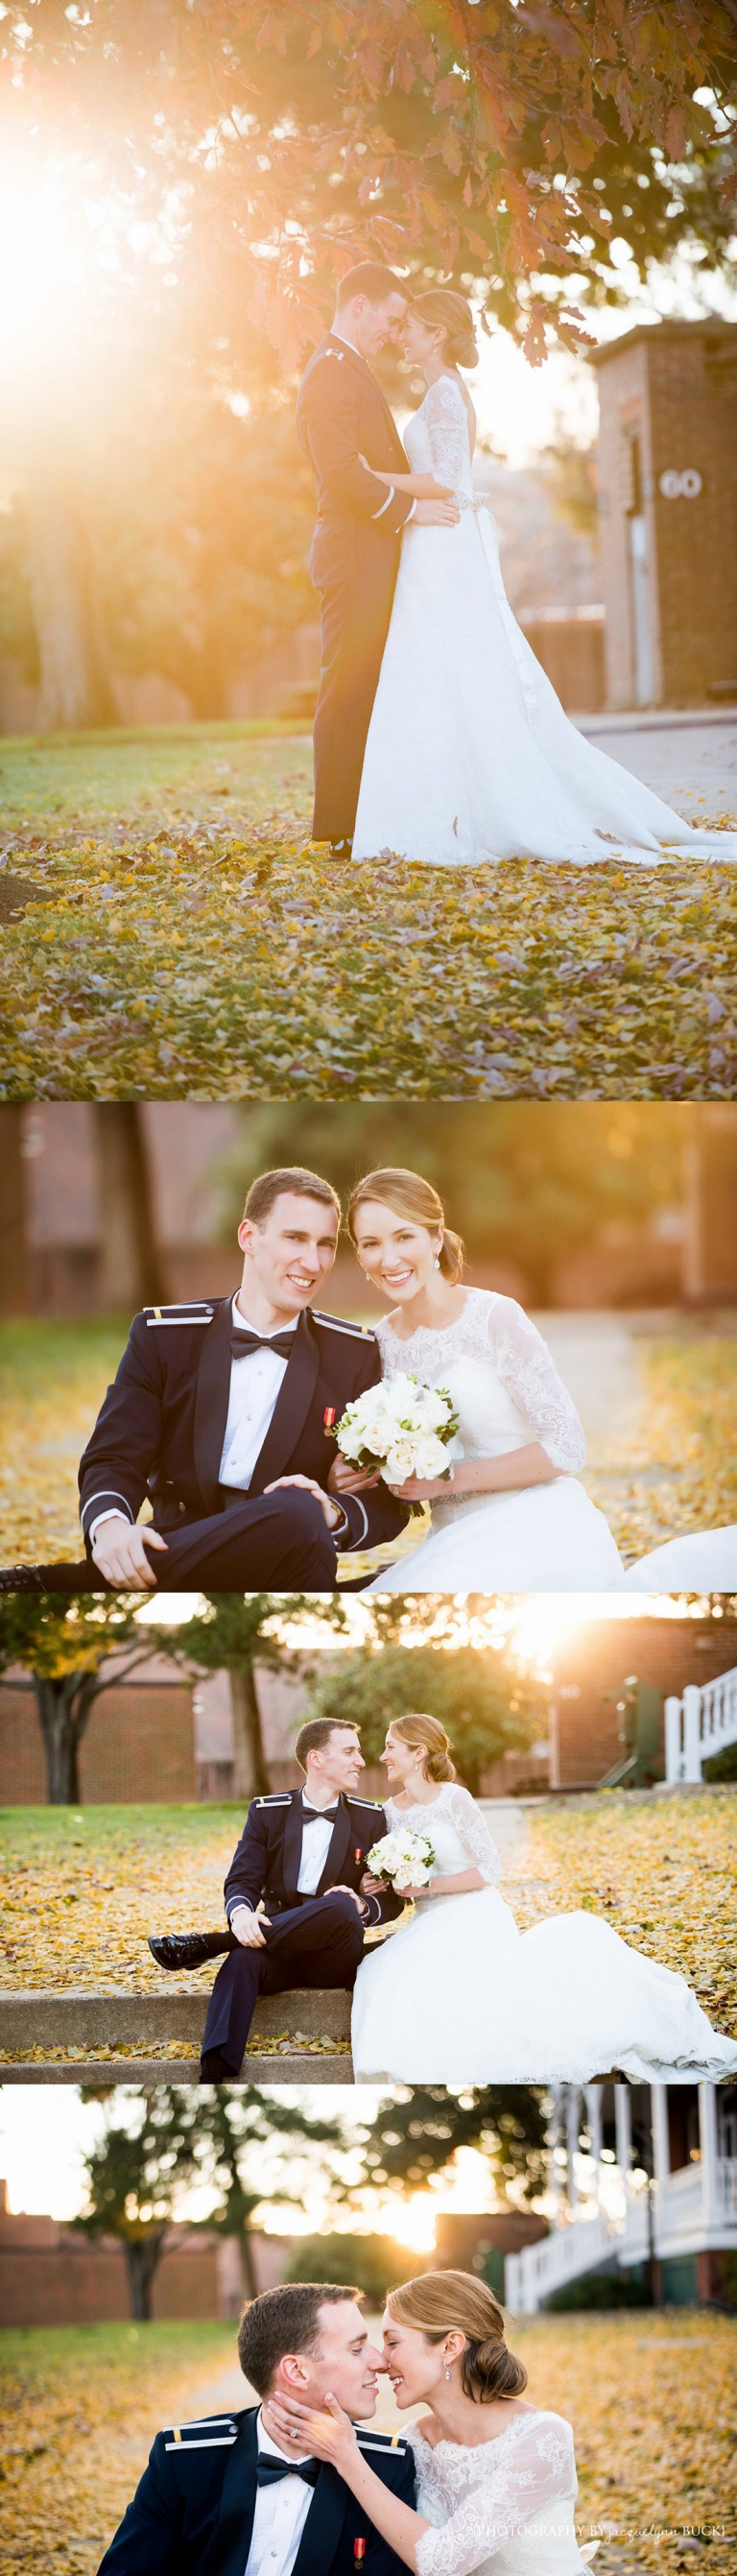 023 ashley and jeff {happily ever after} photography by jacquelynn buck